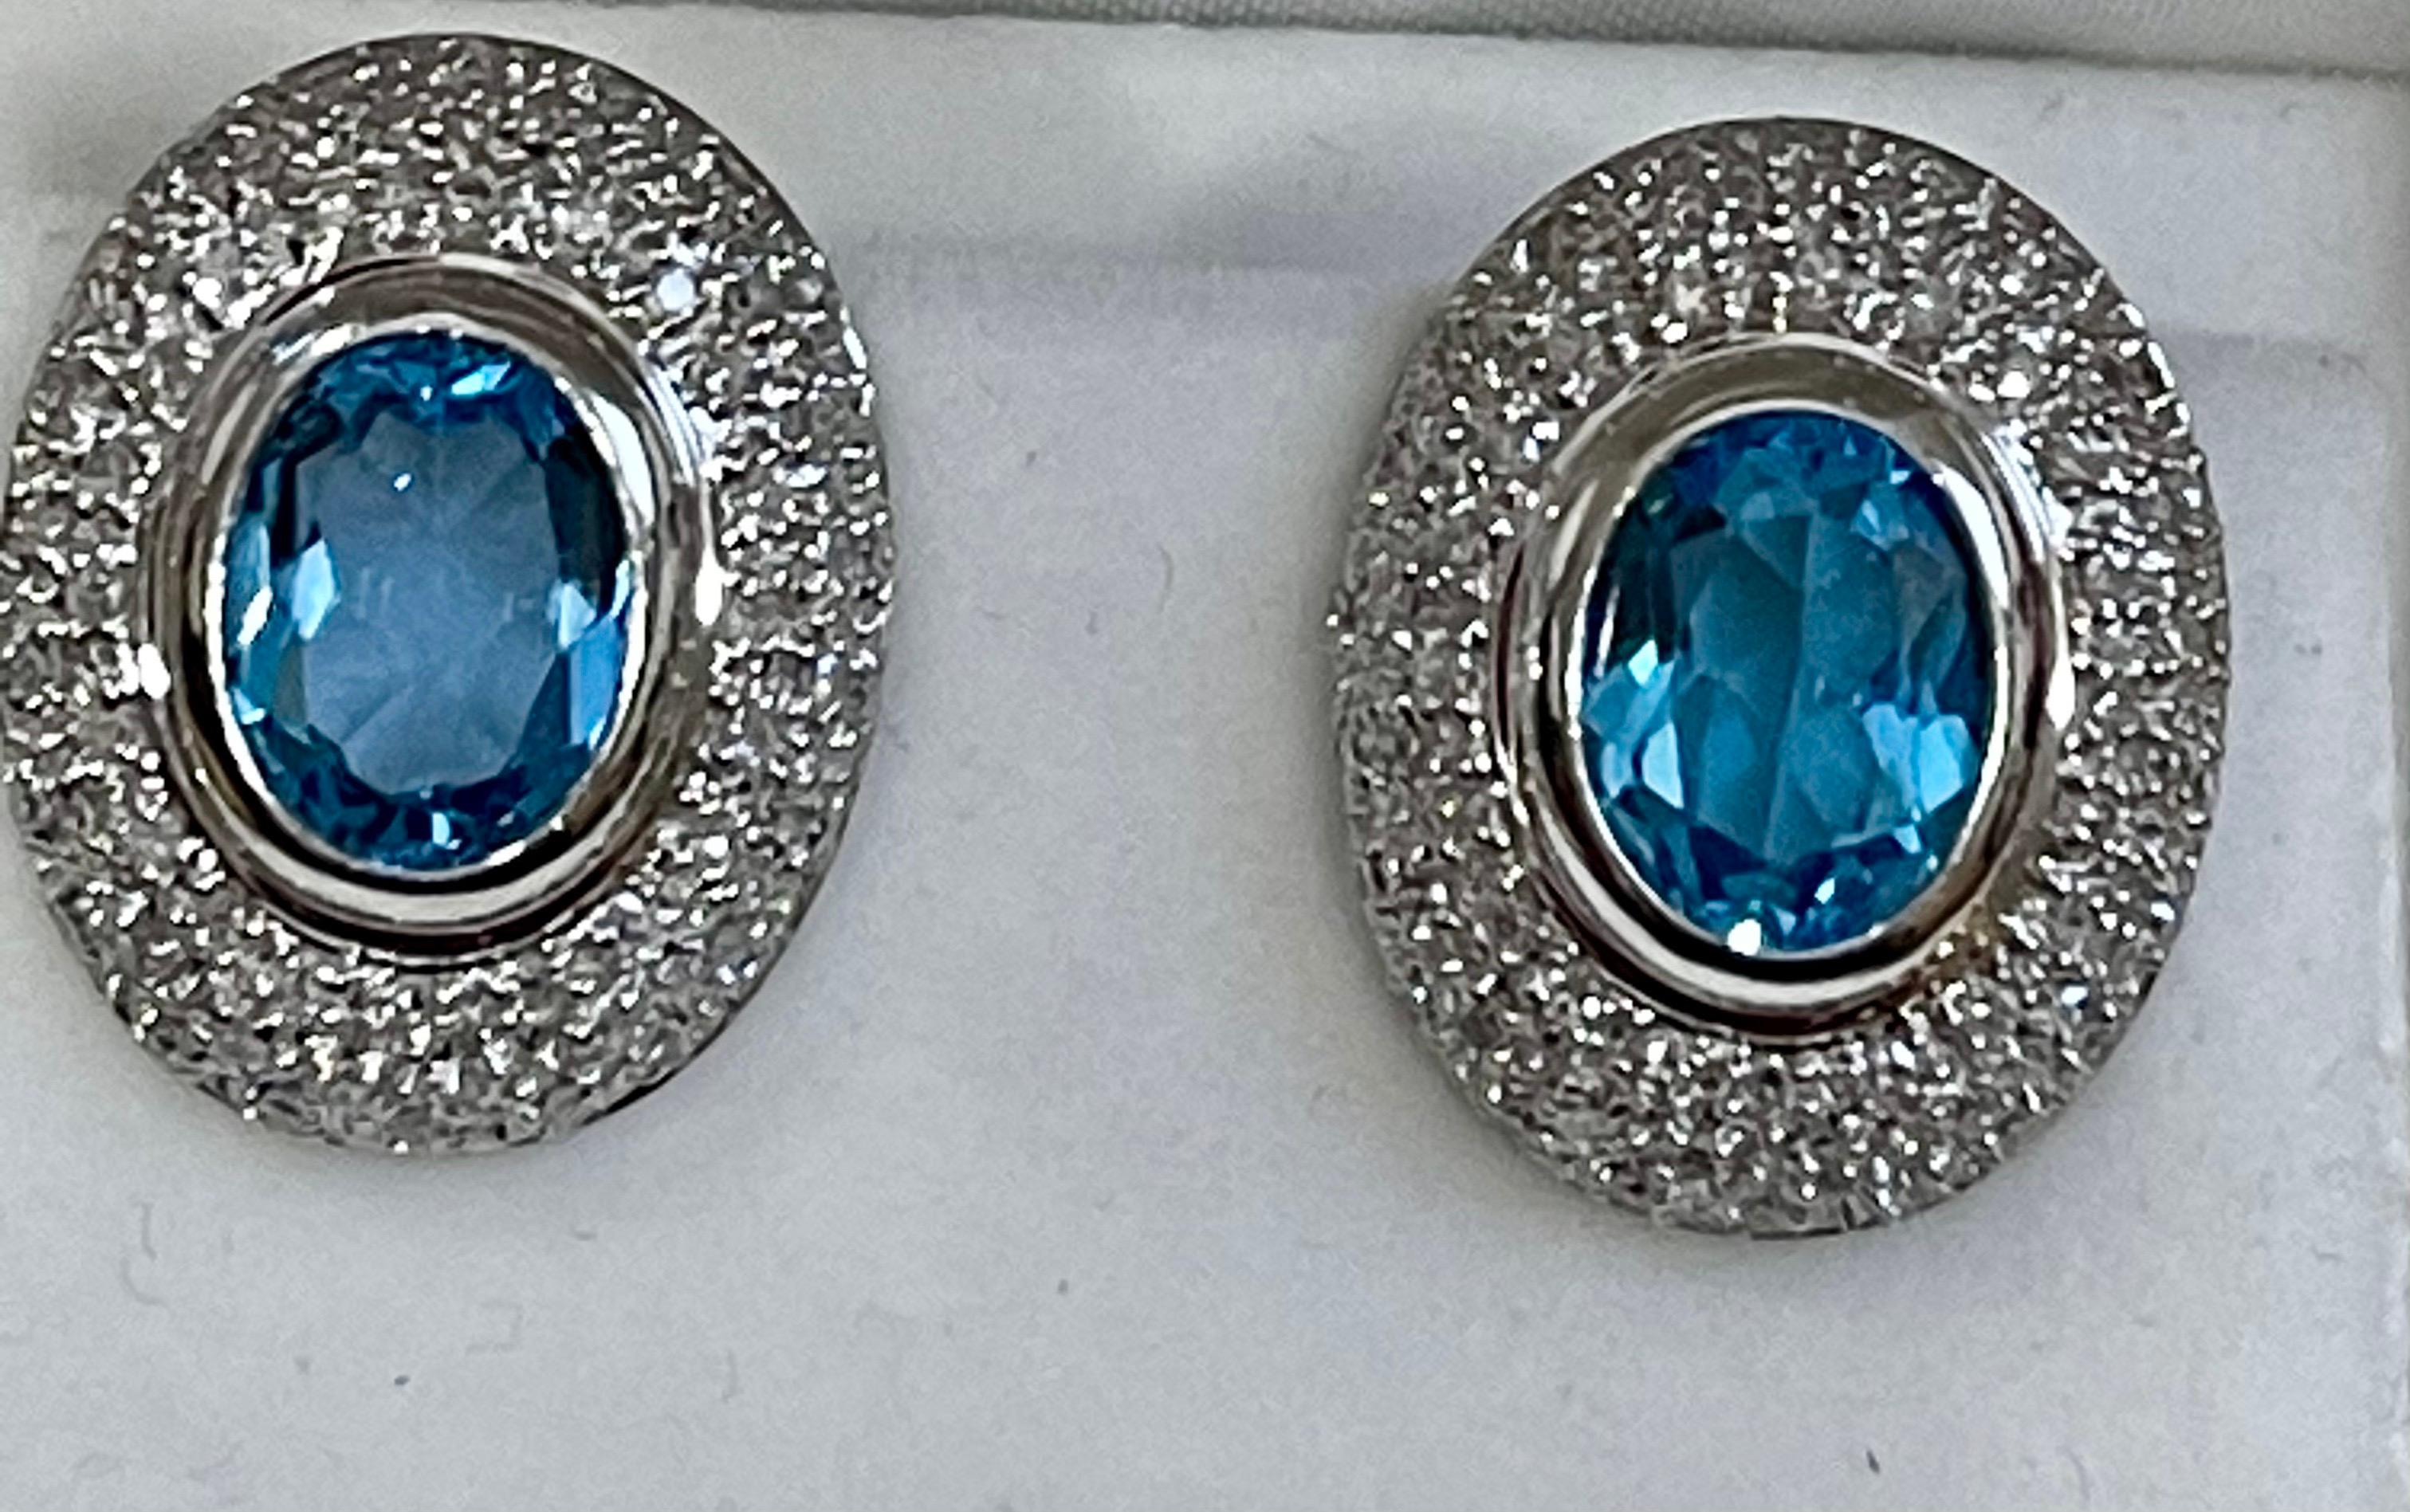 
5 Carat Oval Shape Blue Topaz & Diamond Omega Back Clip Earring 14 Karat White Gold
Two Blue Topaz weighing approximately 5 carats Total
Each Blue Topaz is over 2.5 ct
Natural Nice Blue topaz
Brilliant cut round diamonds about 0.6 ct
This exquisite